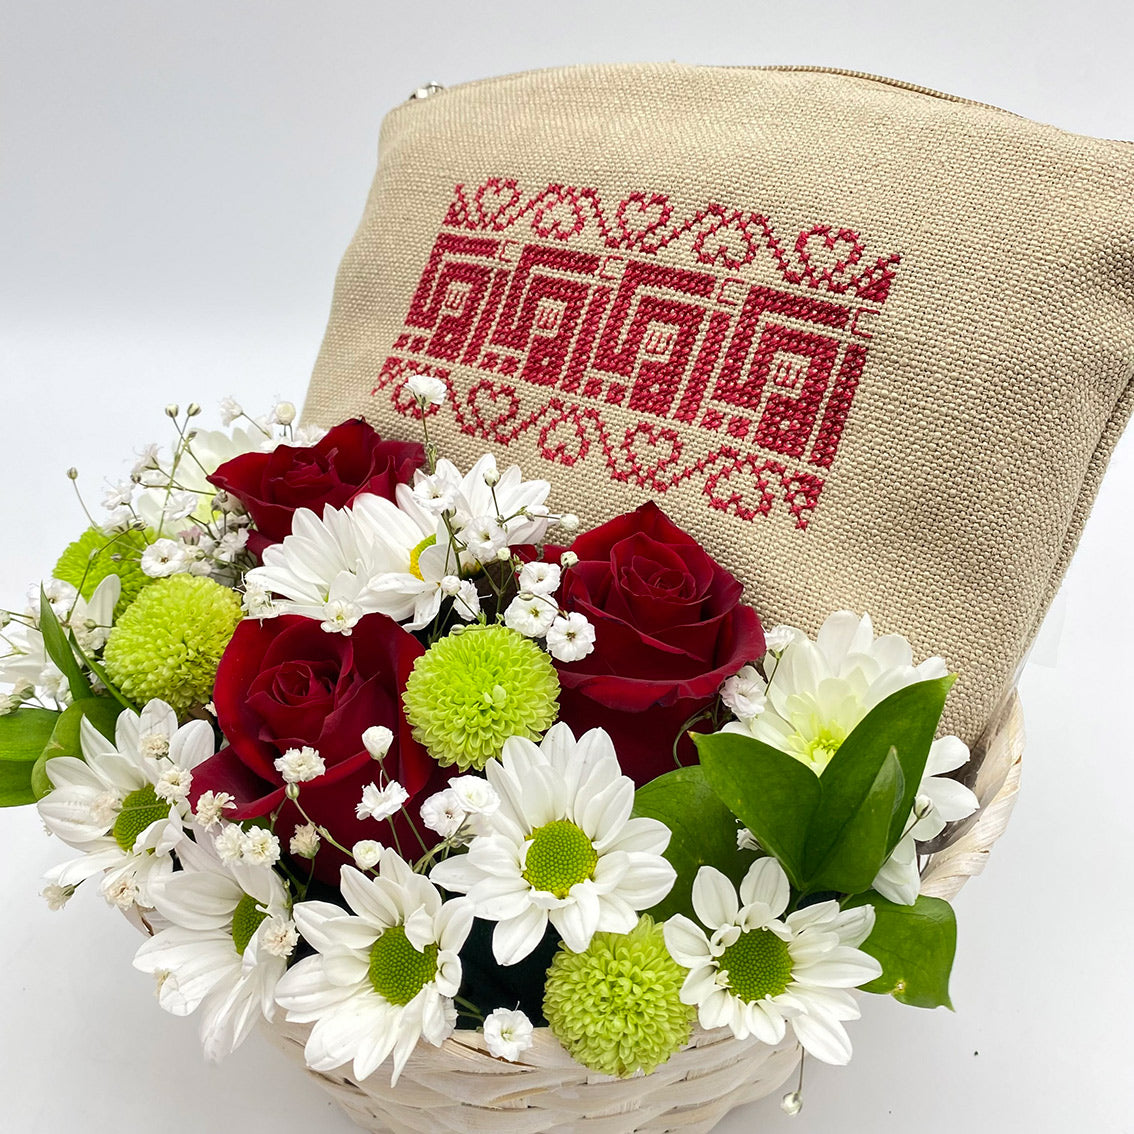 Mom Embroidery Bag with Mixed Flowers